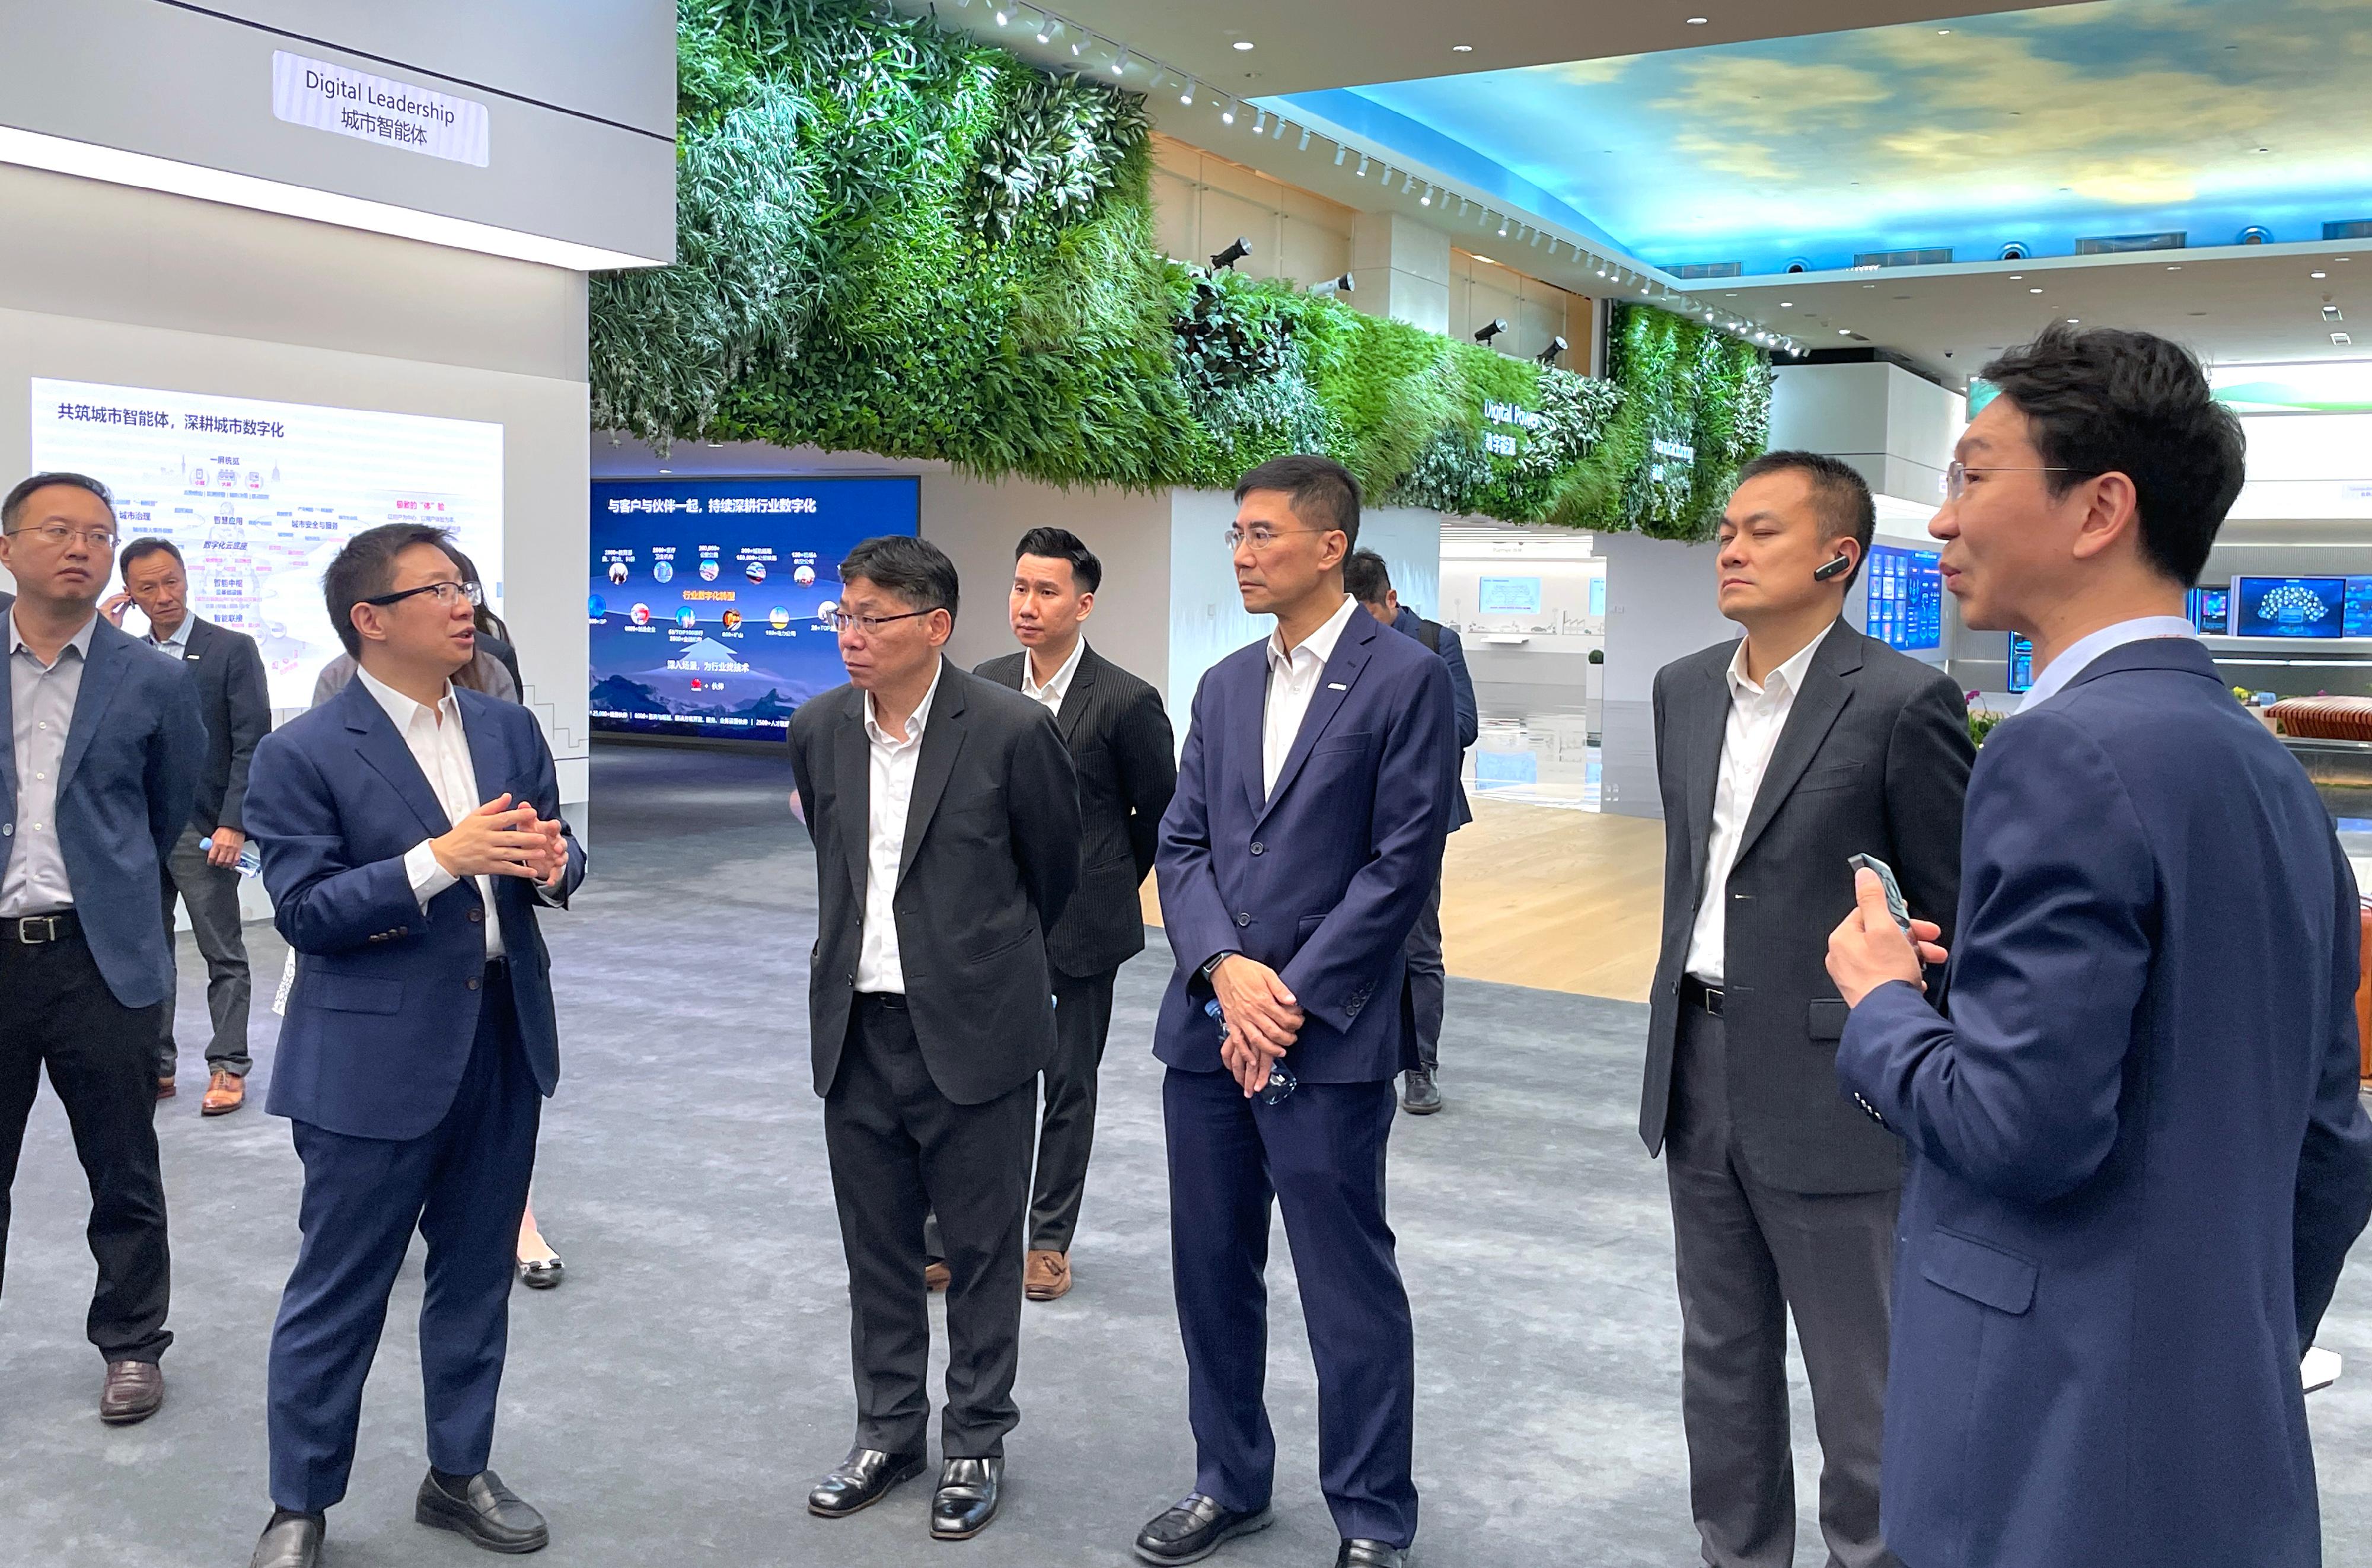 The Secretary for Transport and Logistics, Mr Lam Sai-hung, visited the headquarters of Huawei in Shenzhen today (July 19). Photo shows Mr Lam (third left) being briefed by a Huawei representative on the functionalities and technological development of its integrated smart traffic control platform.